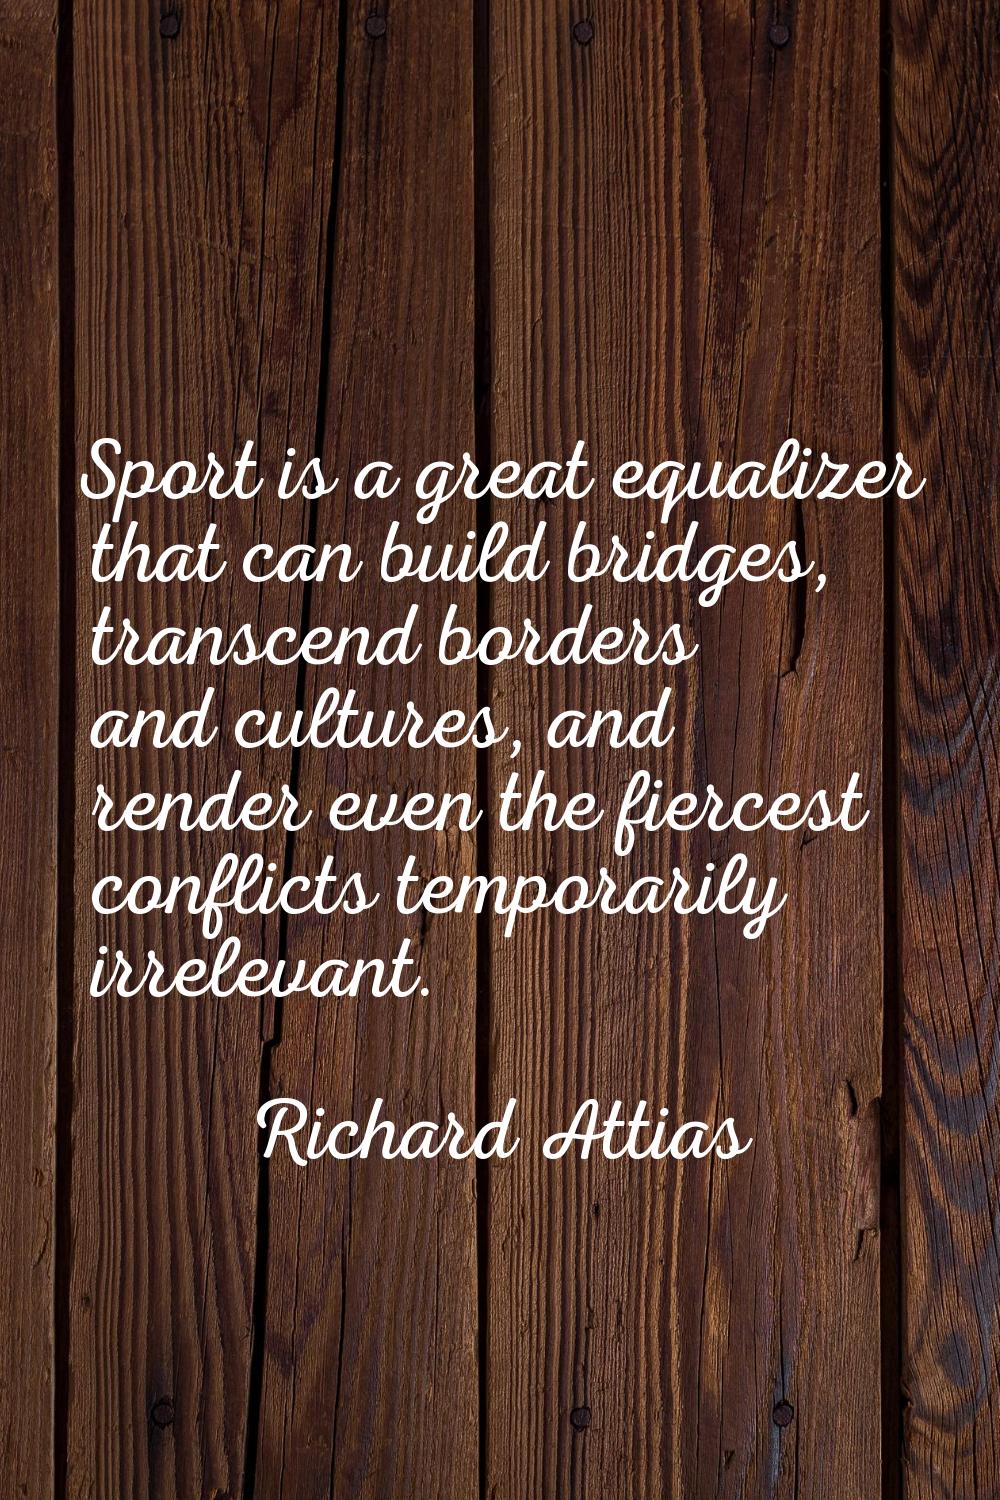 Sport is a great equalizer that can build bridges, transcend borders and cultures, and render even 